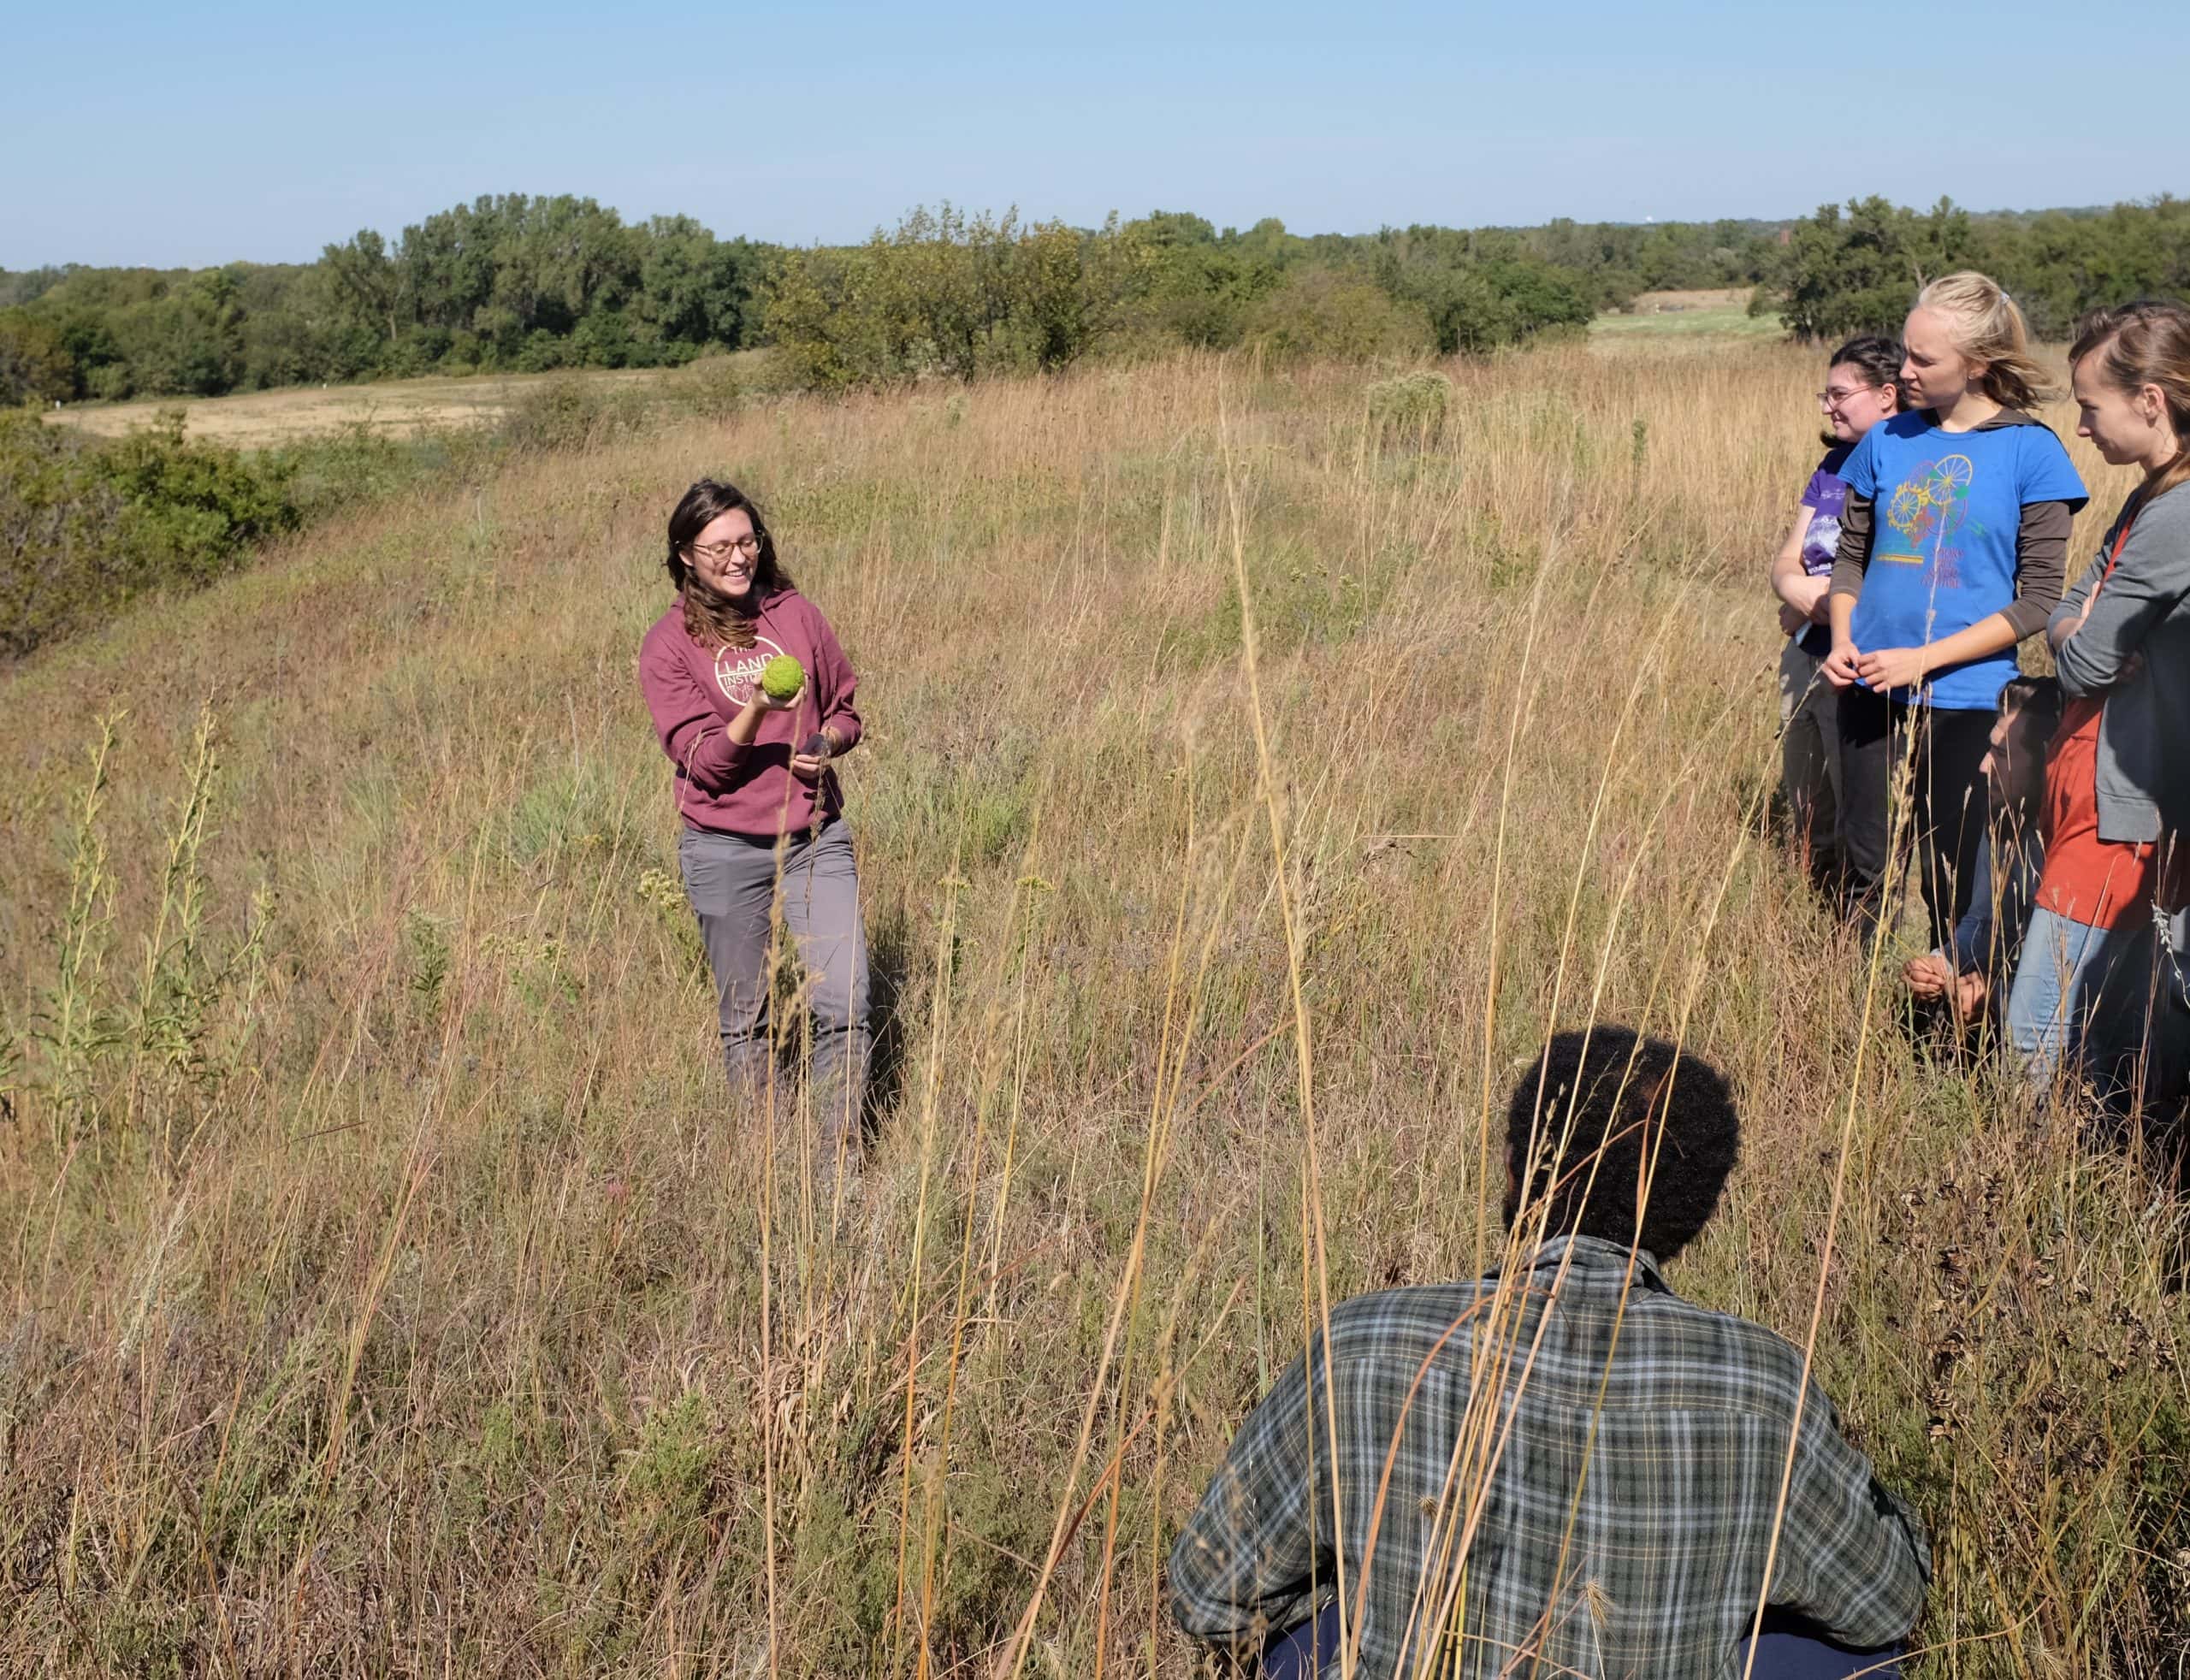 Aubrey Streit Krug, director of ecosphere studies at The Land Institute, leads co-workers at a lunchtime plant identification walk on our native Wauhob Prairie.